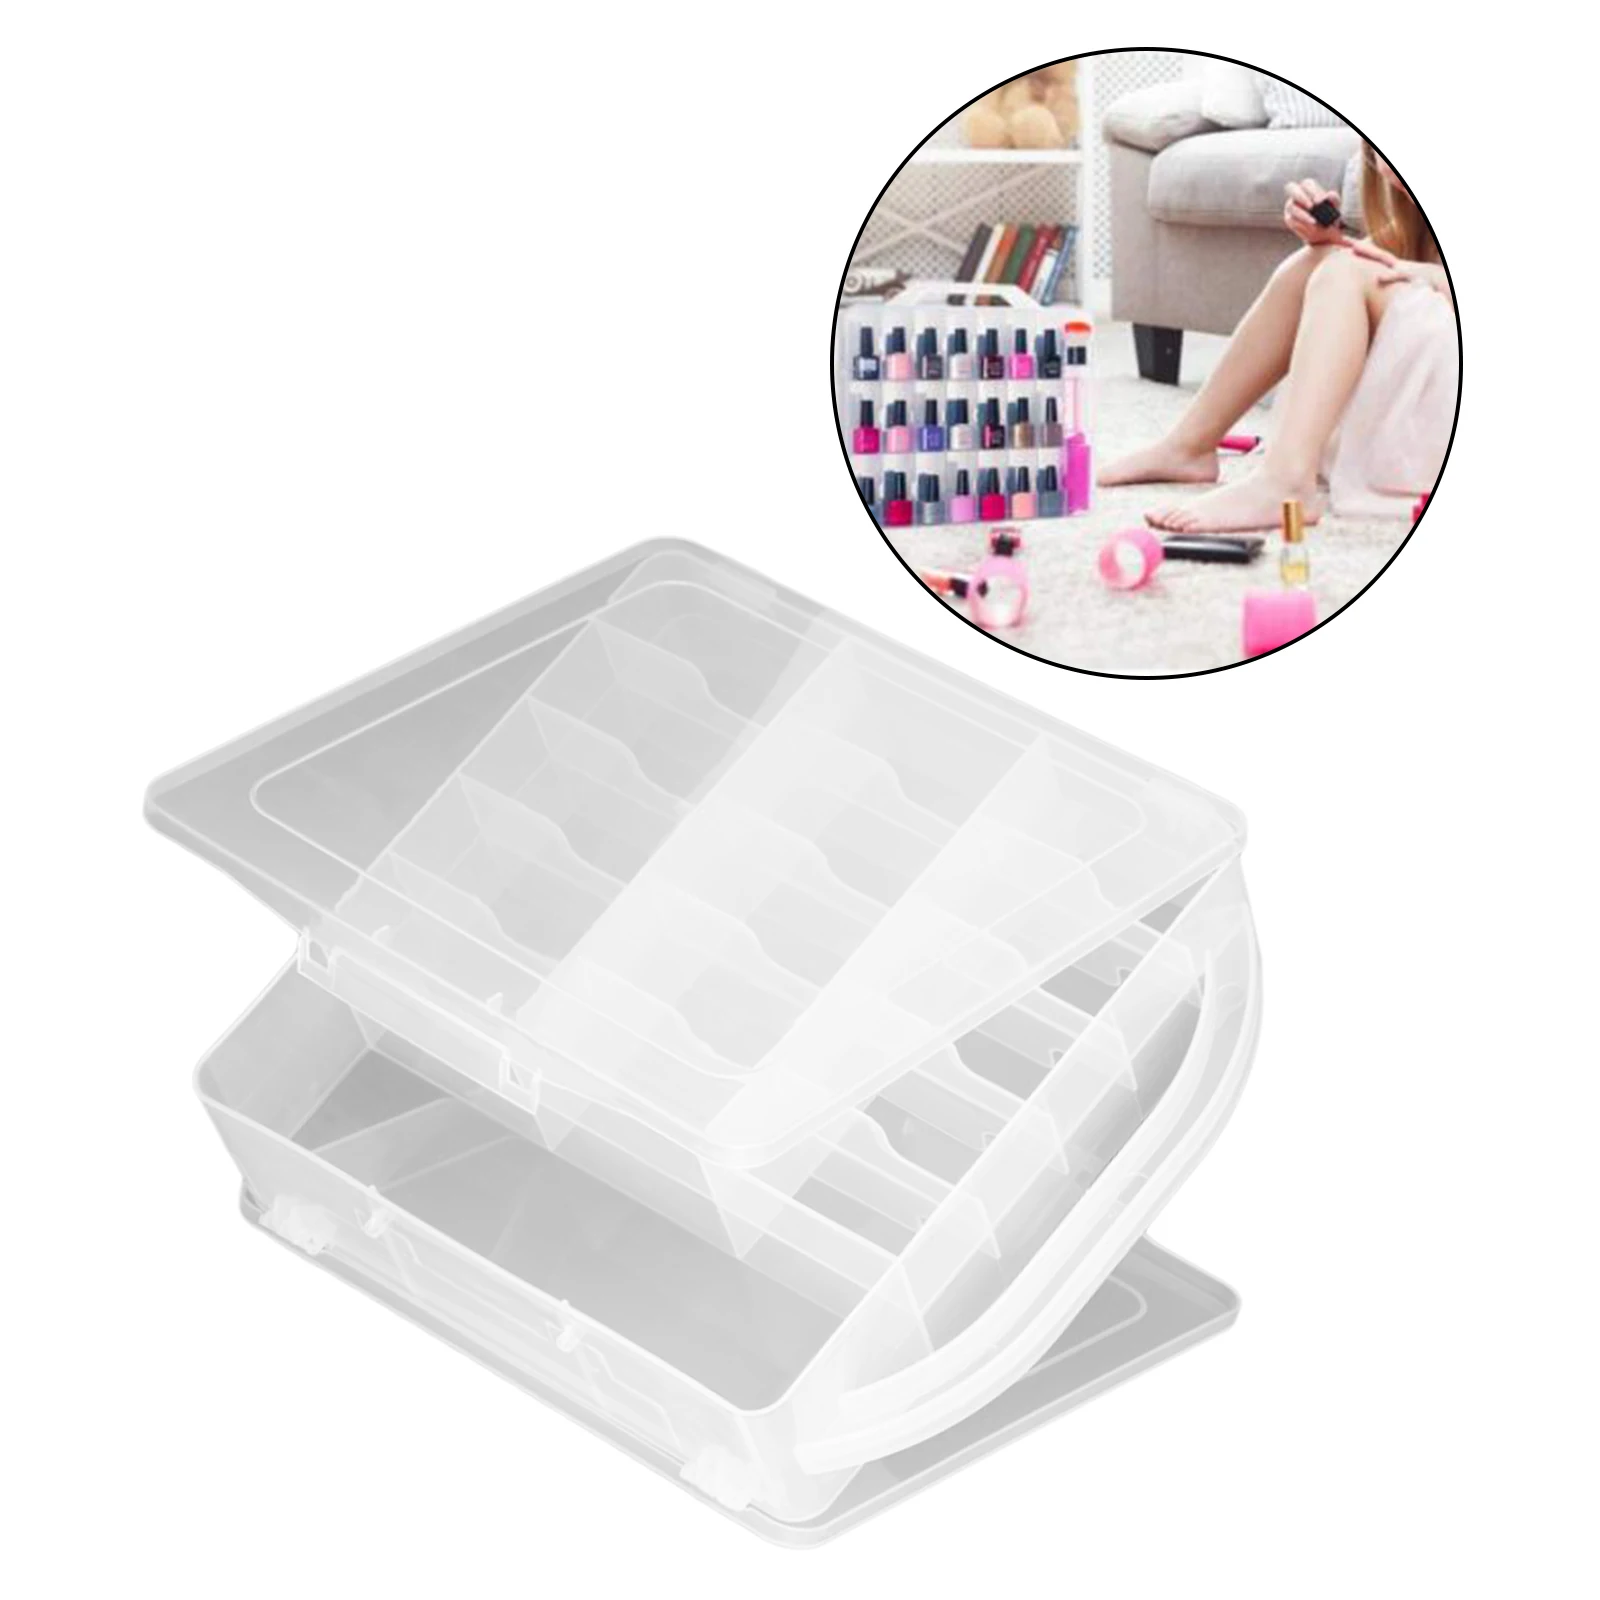 Portable Nail Polish Case Storage Caddy Organisers for 30 Bottles Dust-proof